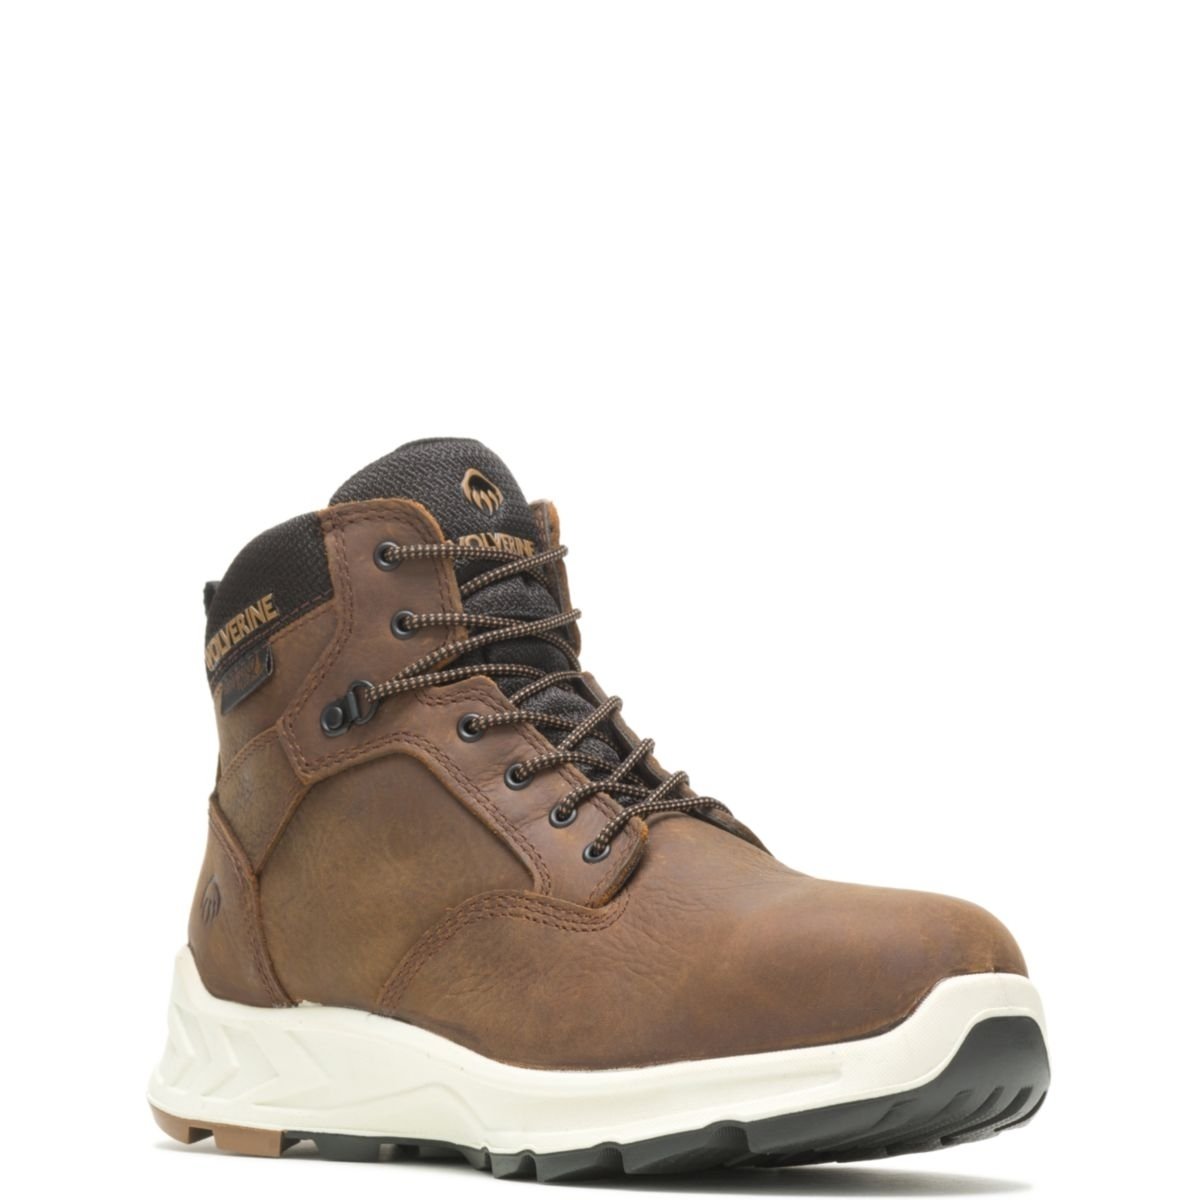 WOLVERINE Men's ShiftPlus Work LX 6 Alloy Toe Work Boot Brown - W201156 BROWN - BROWN, 12-M